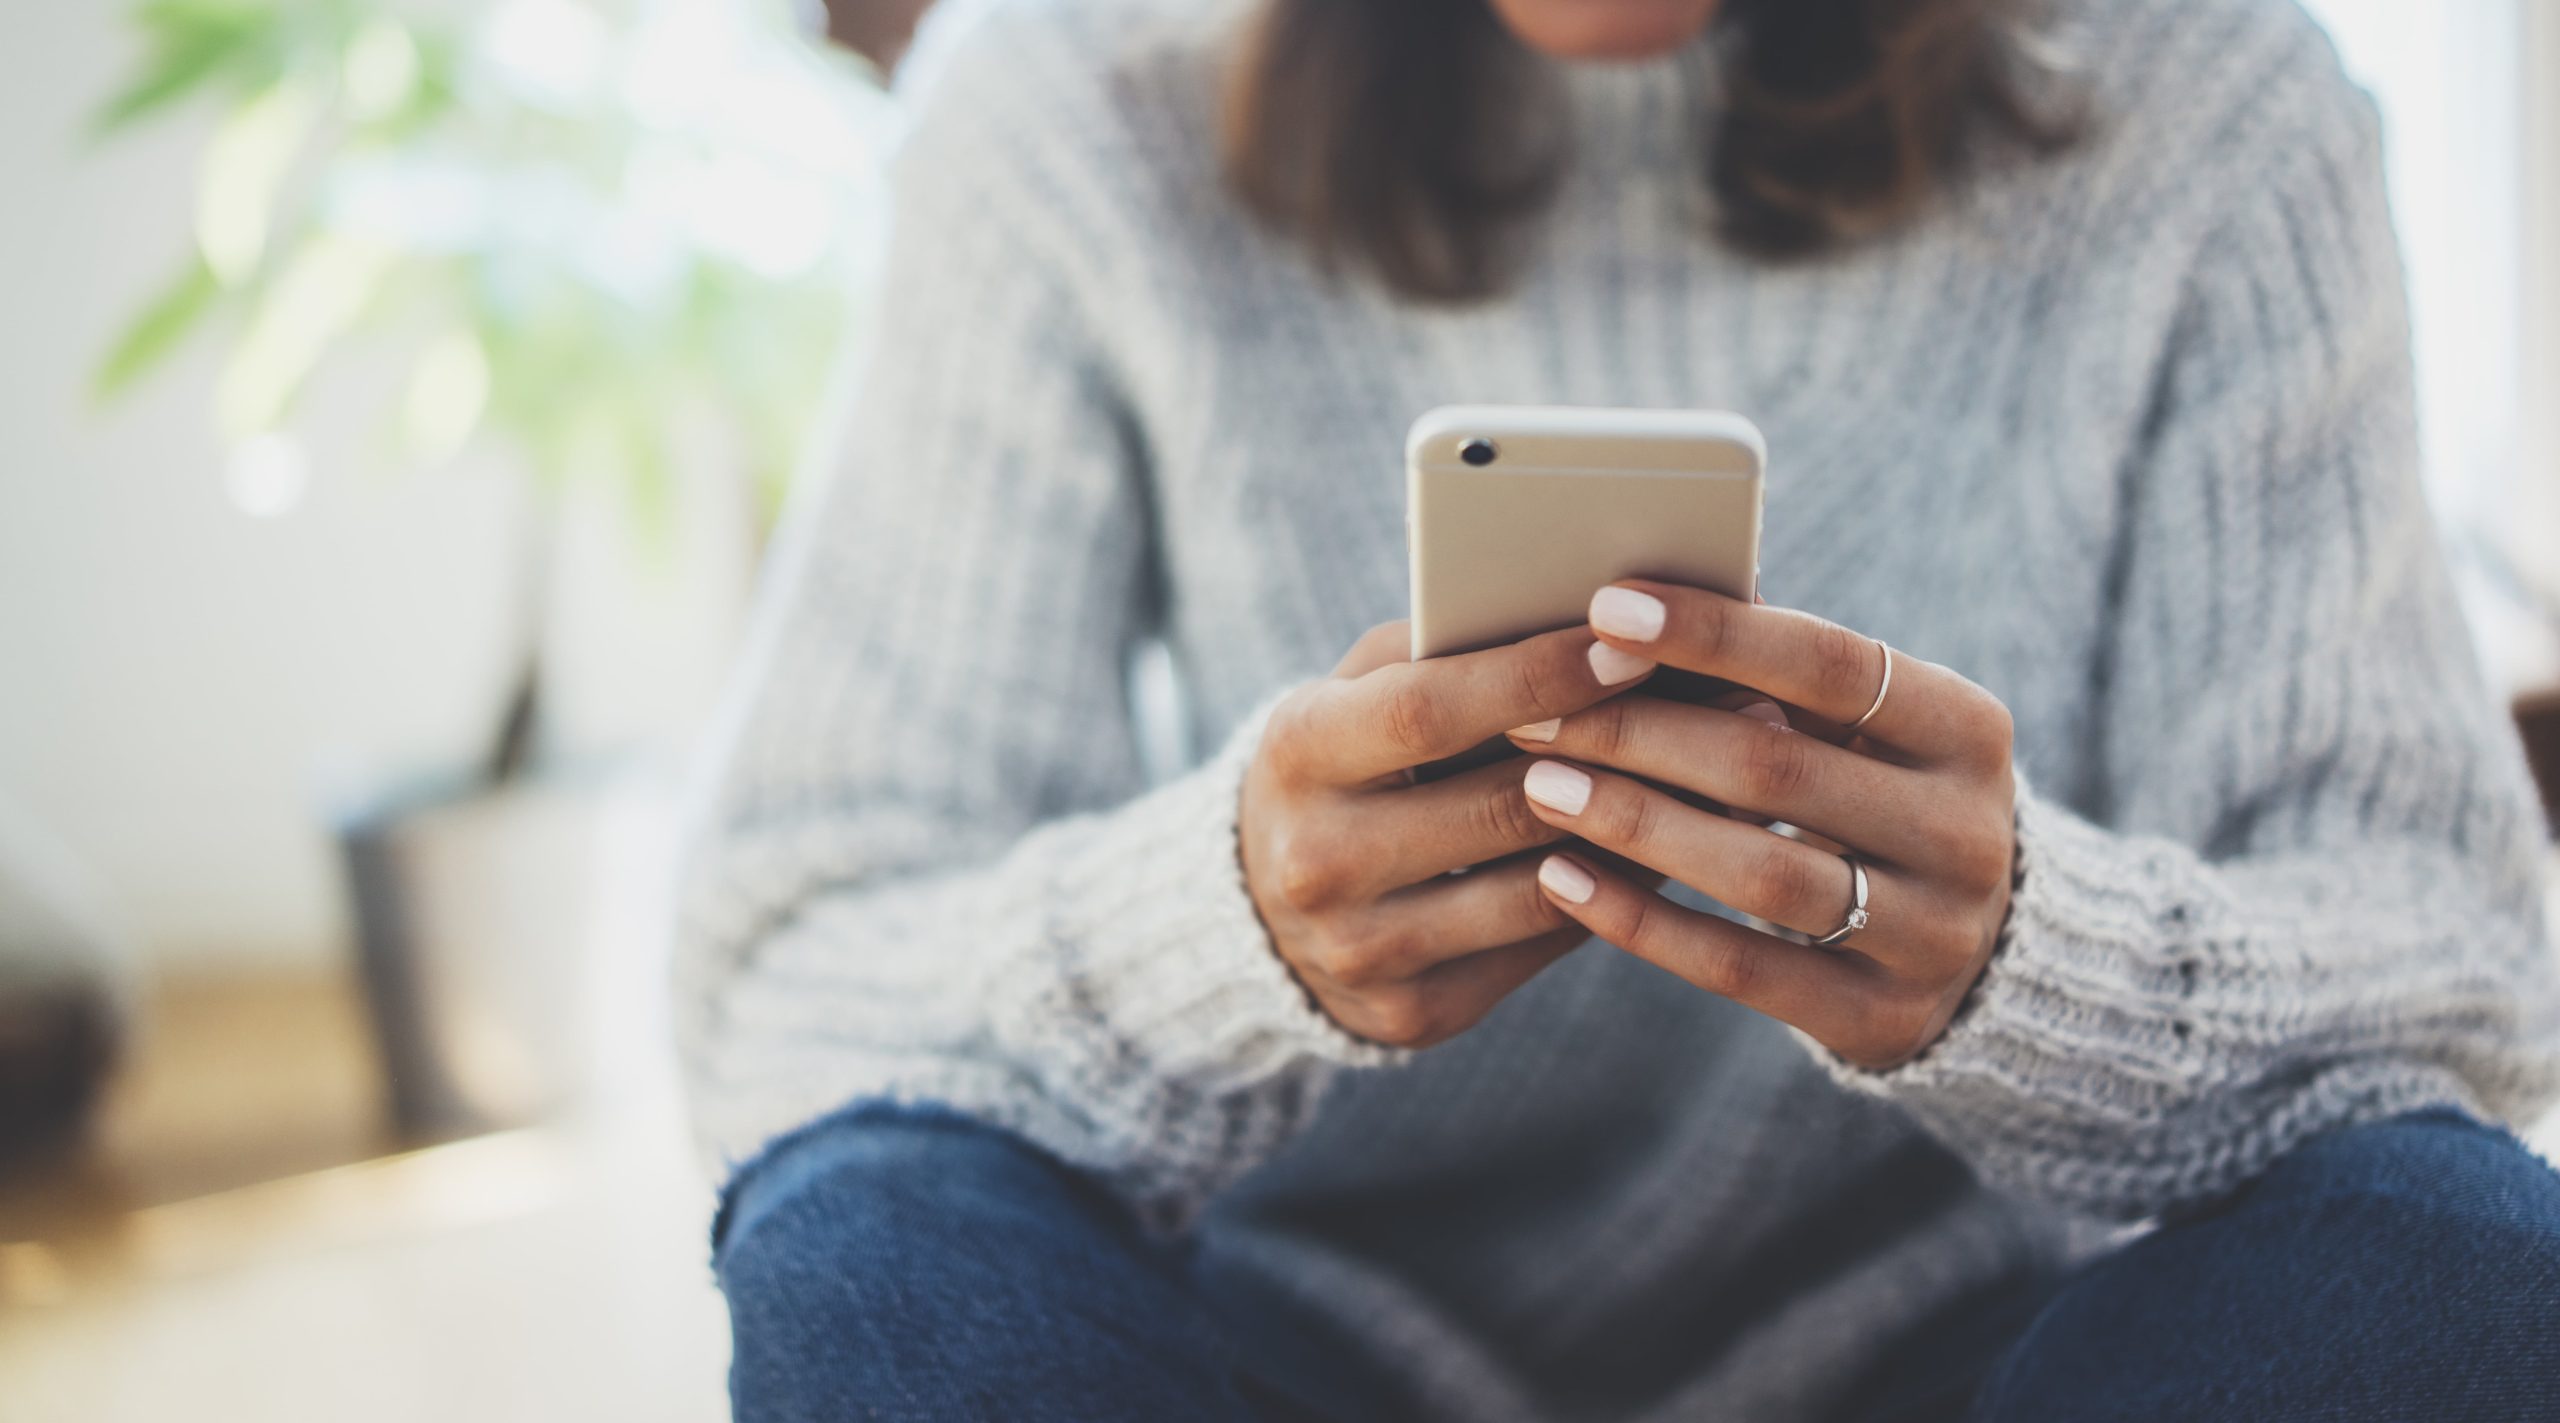 Why Churches Should Leverage Texting to Engage Their Congregations